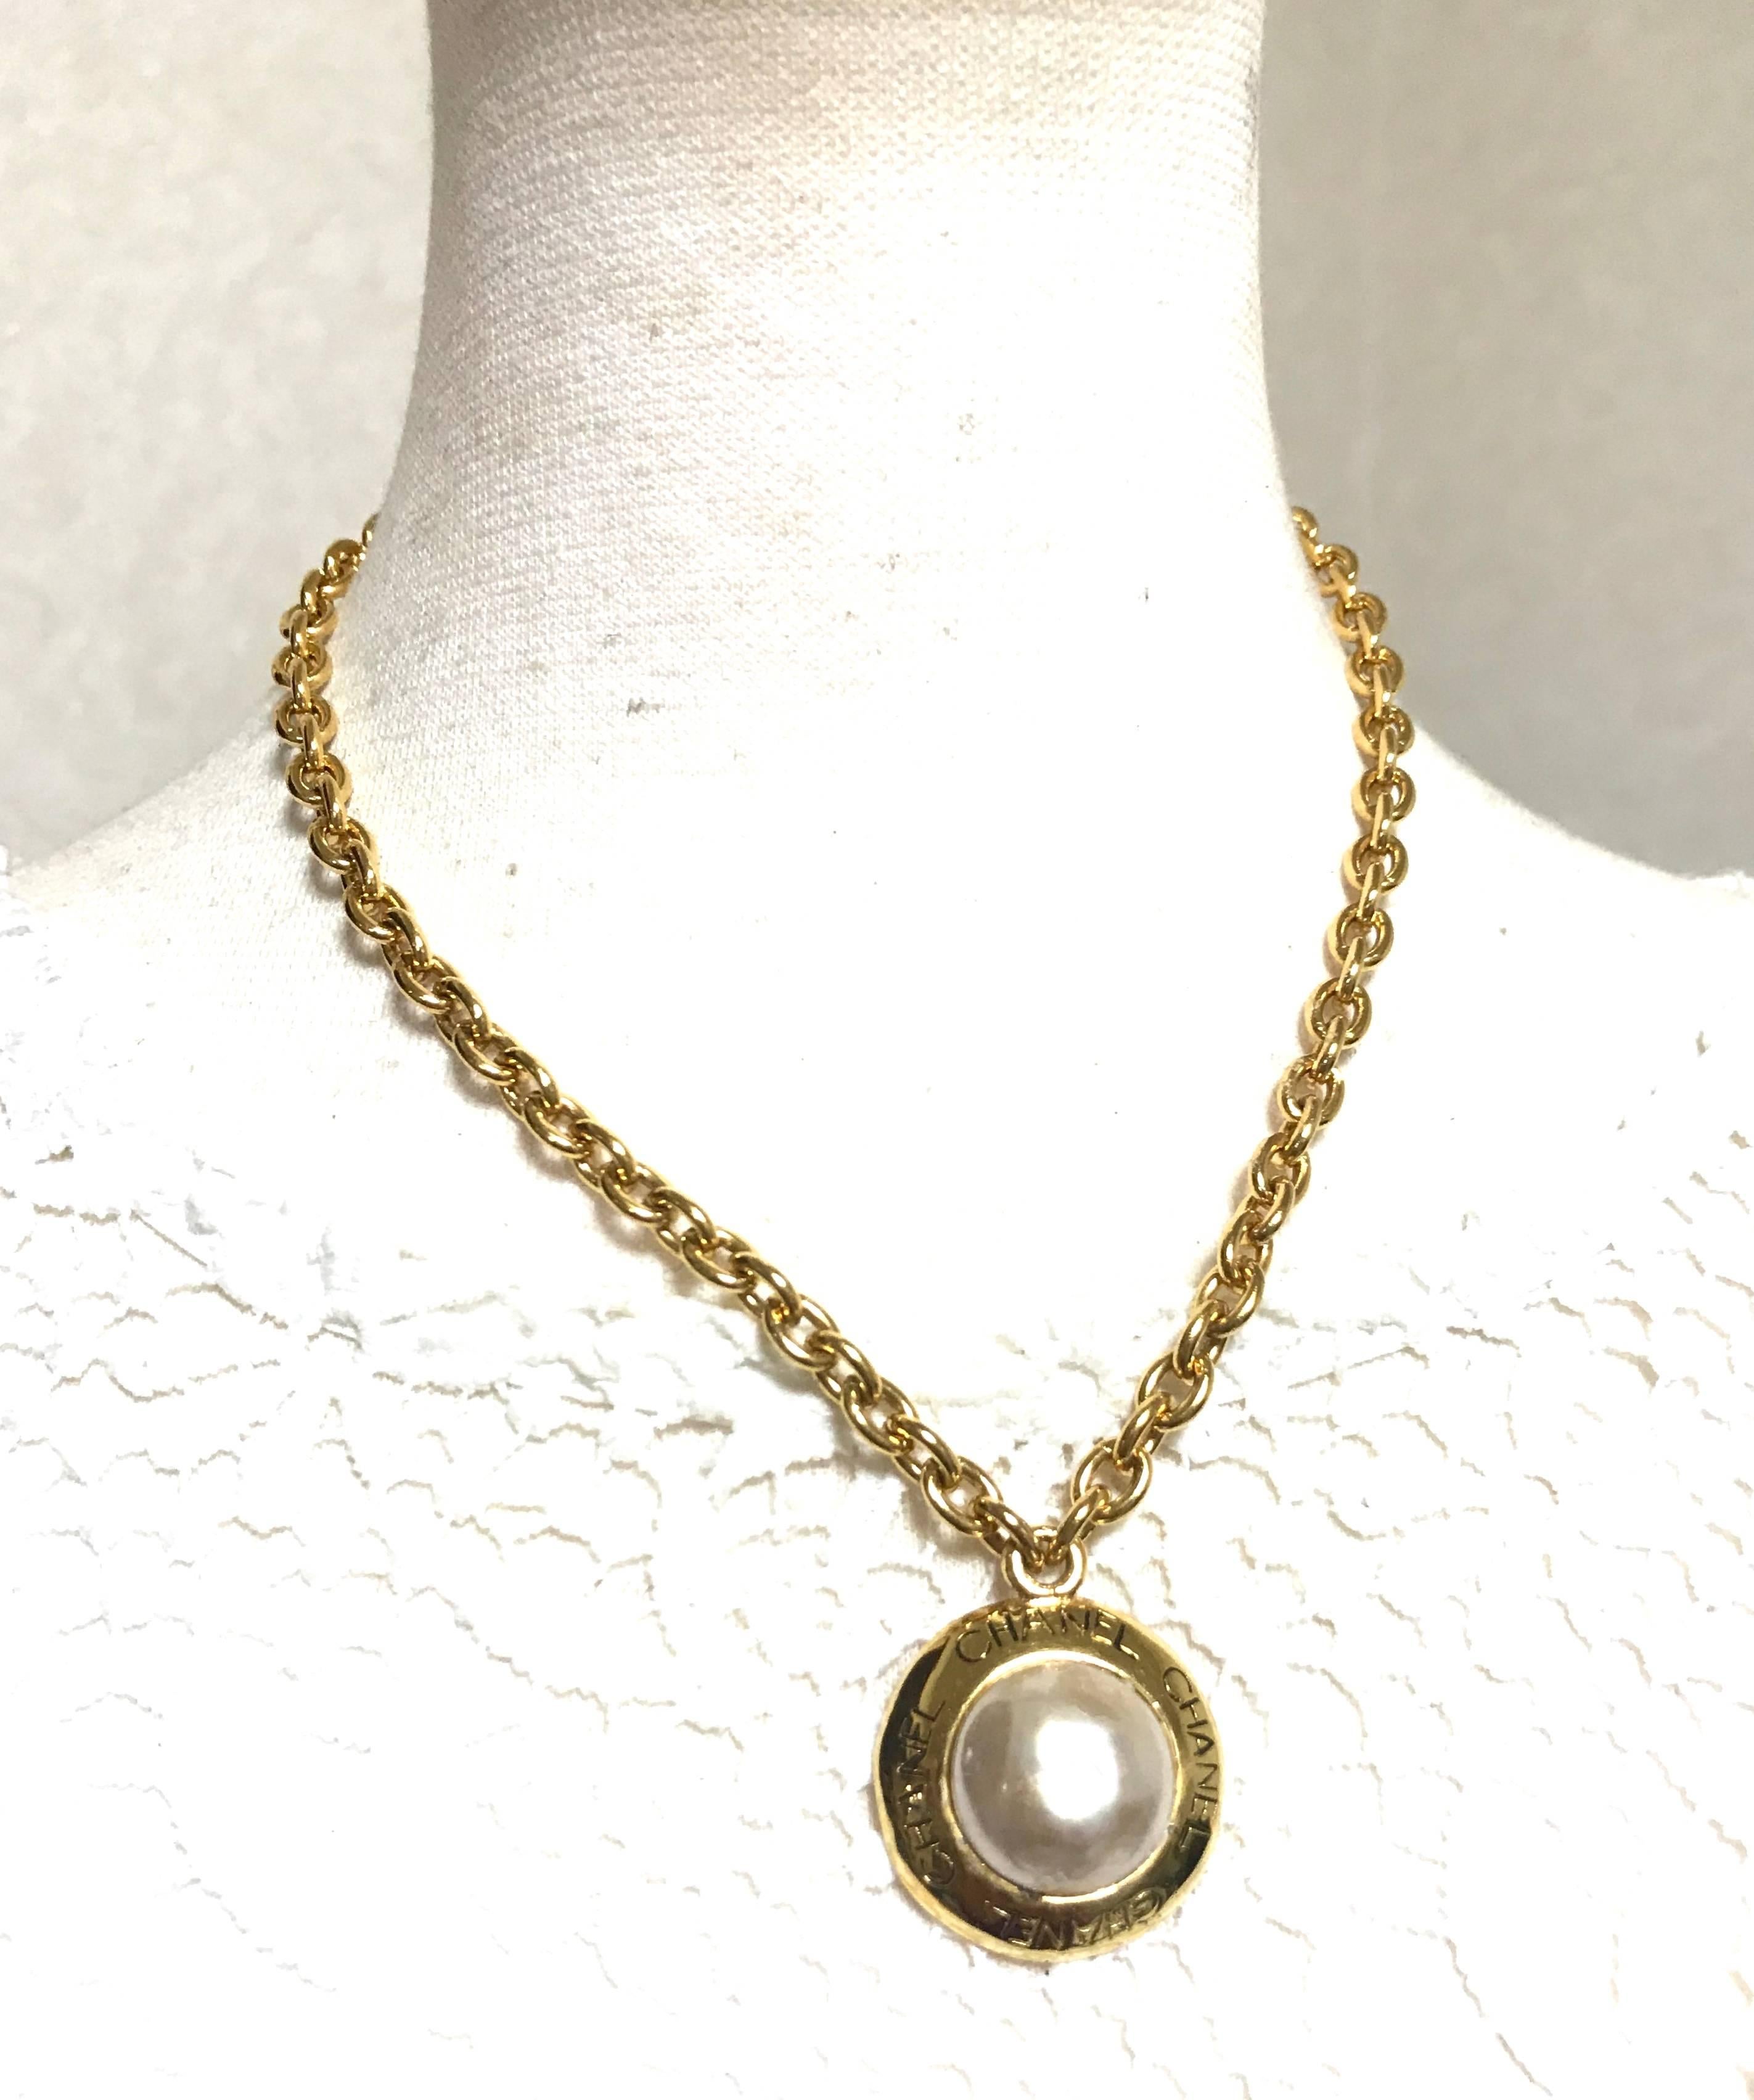 Vintage CHANEL golden chain necklace with round faux pearl and logo pendant top. For Sale 1